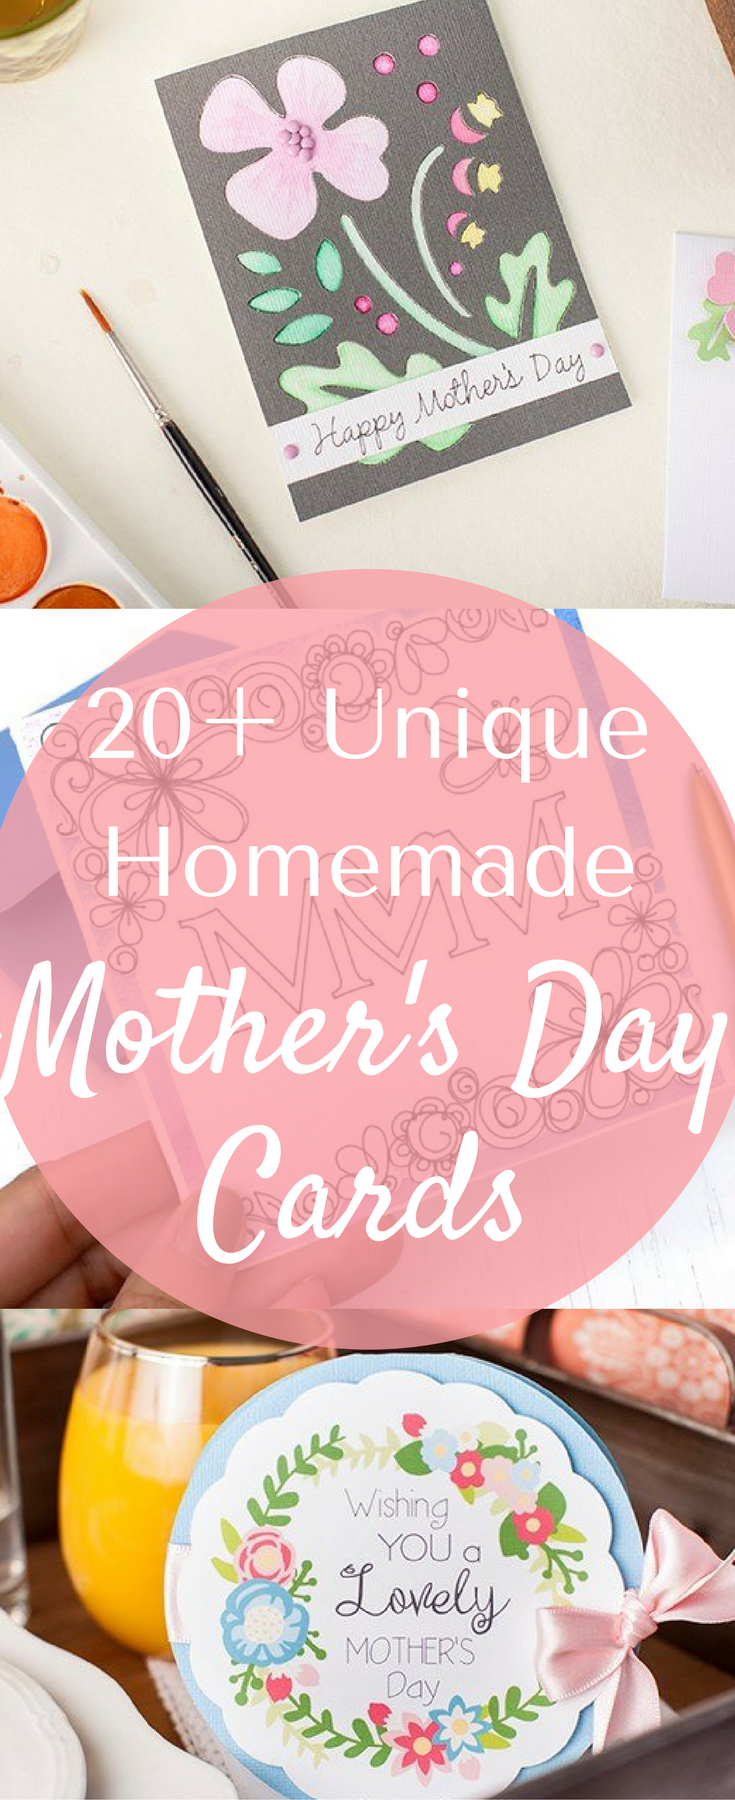 Printable Homemade Mothers Day Cards